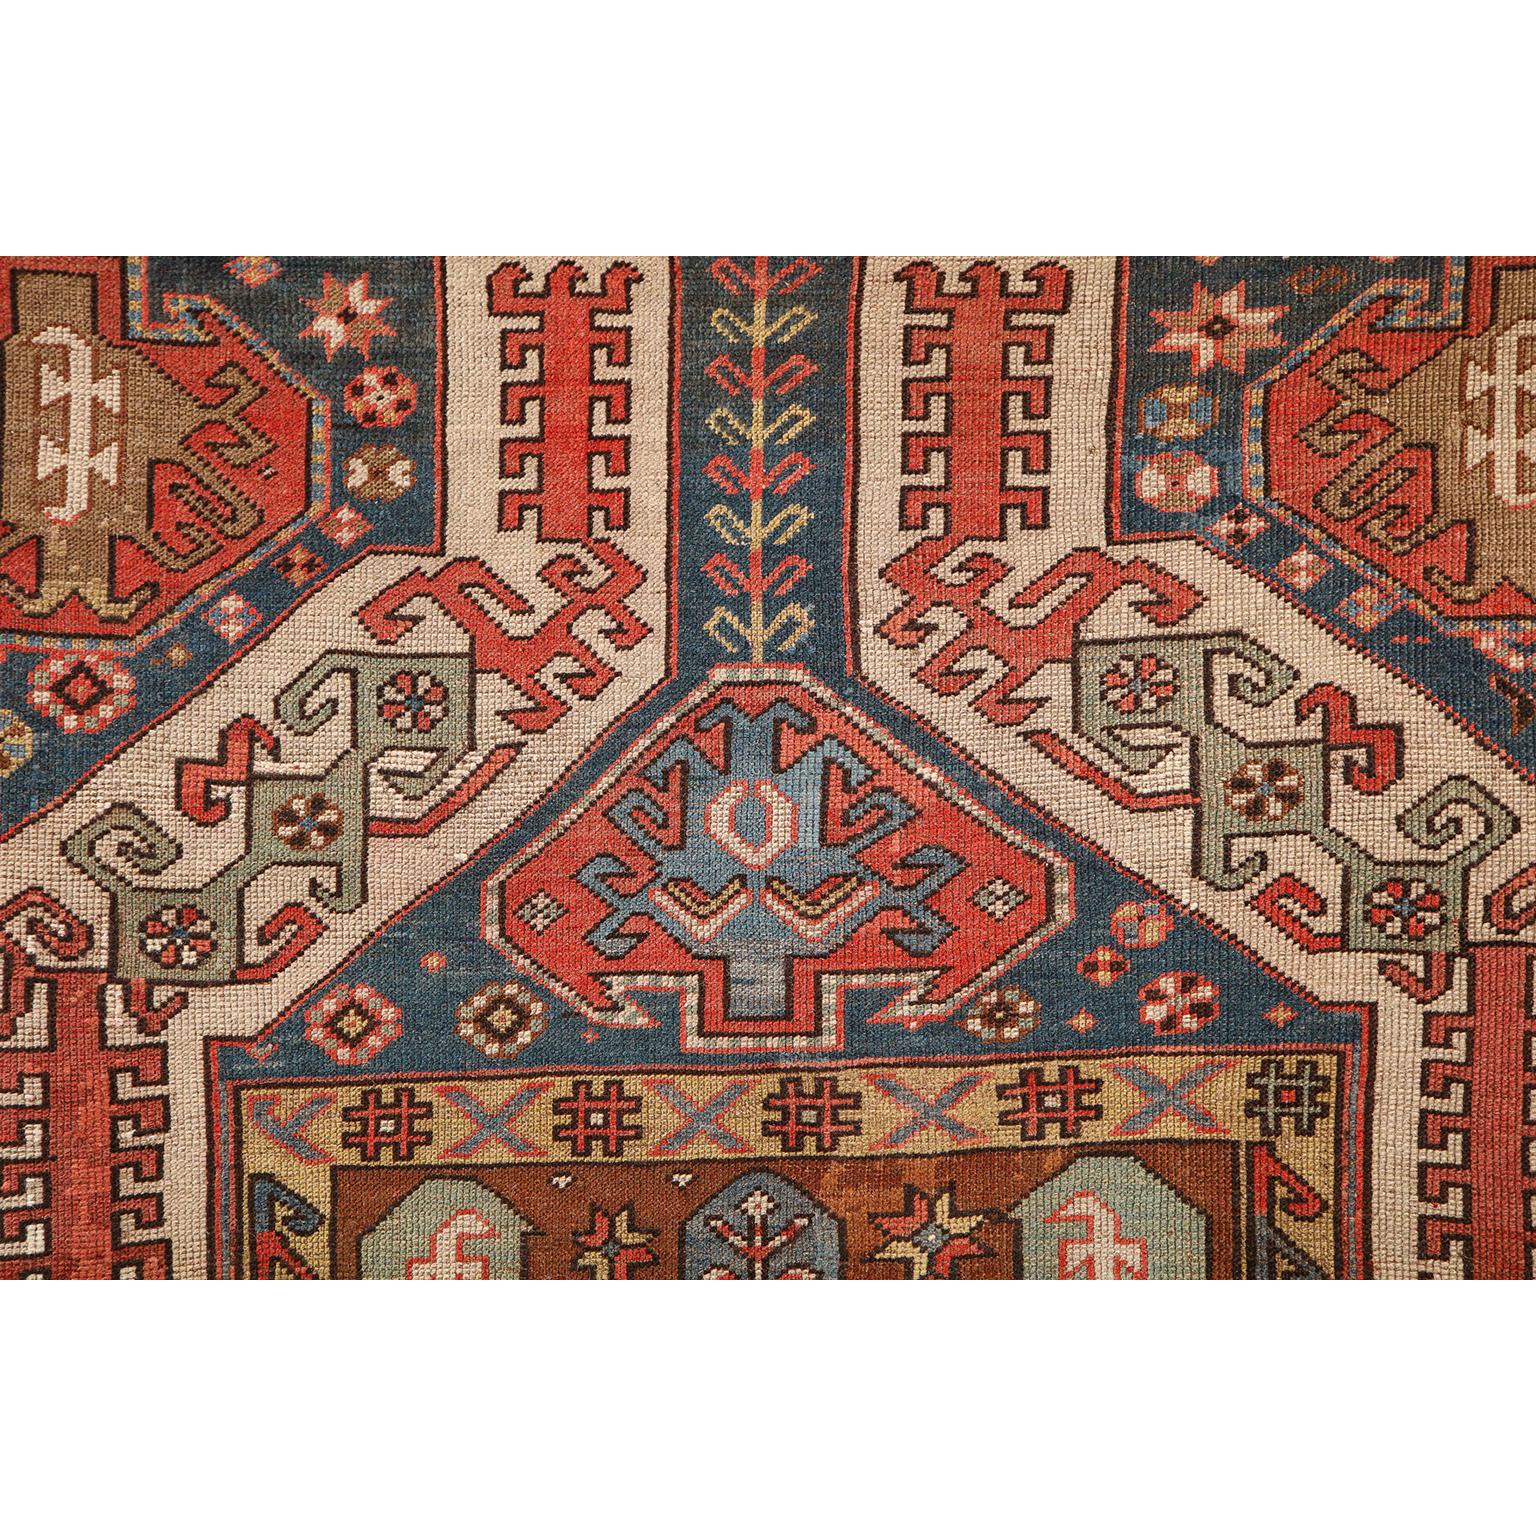 Late 19th Century Antique 1880s Caucasian Rug, Hand-knotted Wool, Blue, Green, Red, 4' x 6' For Sale